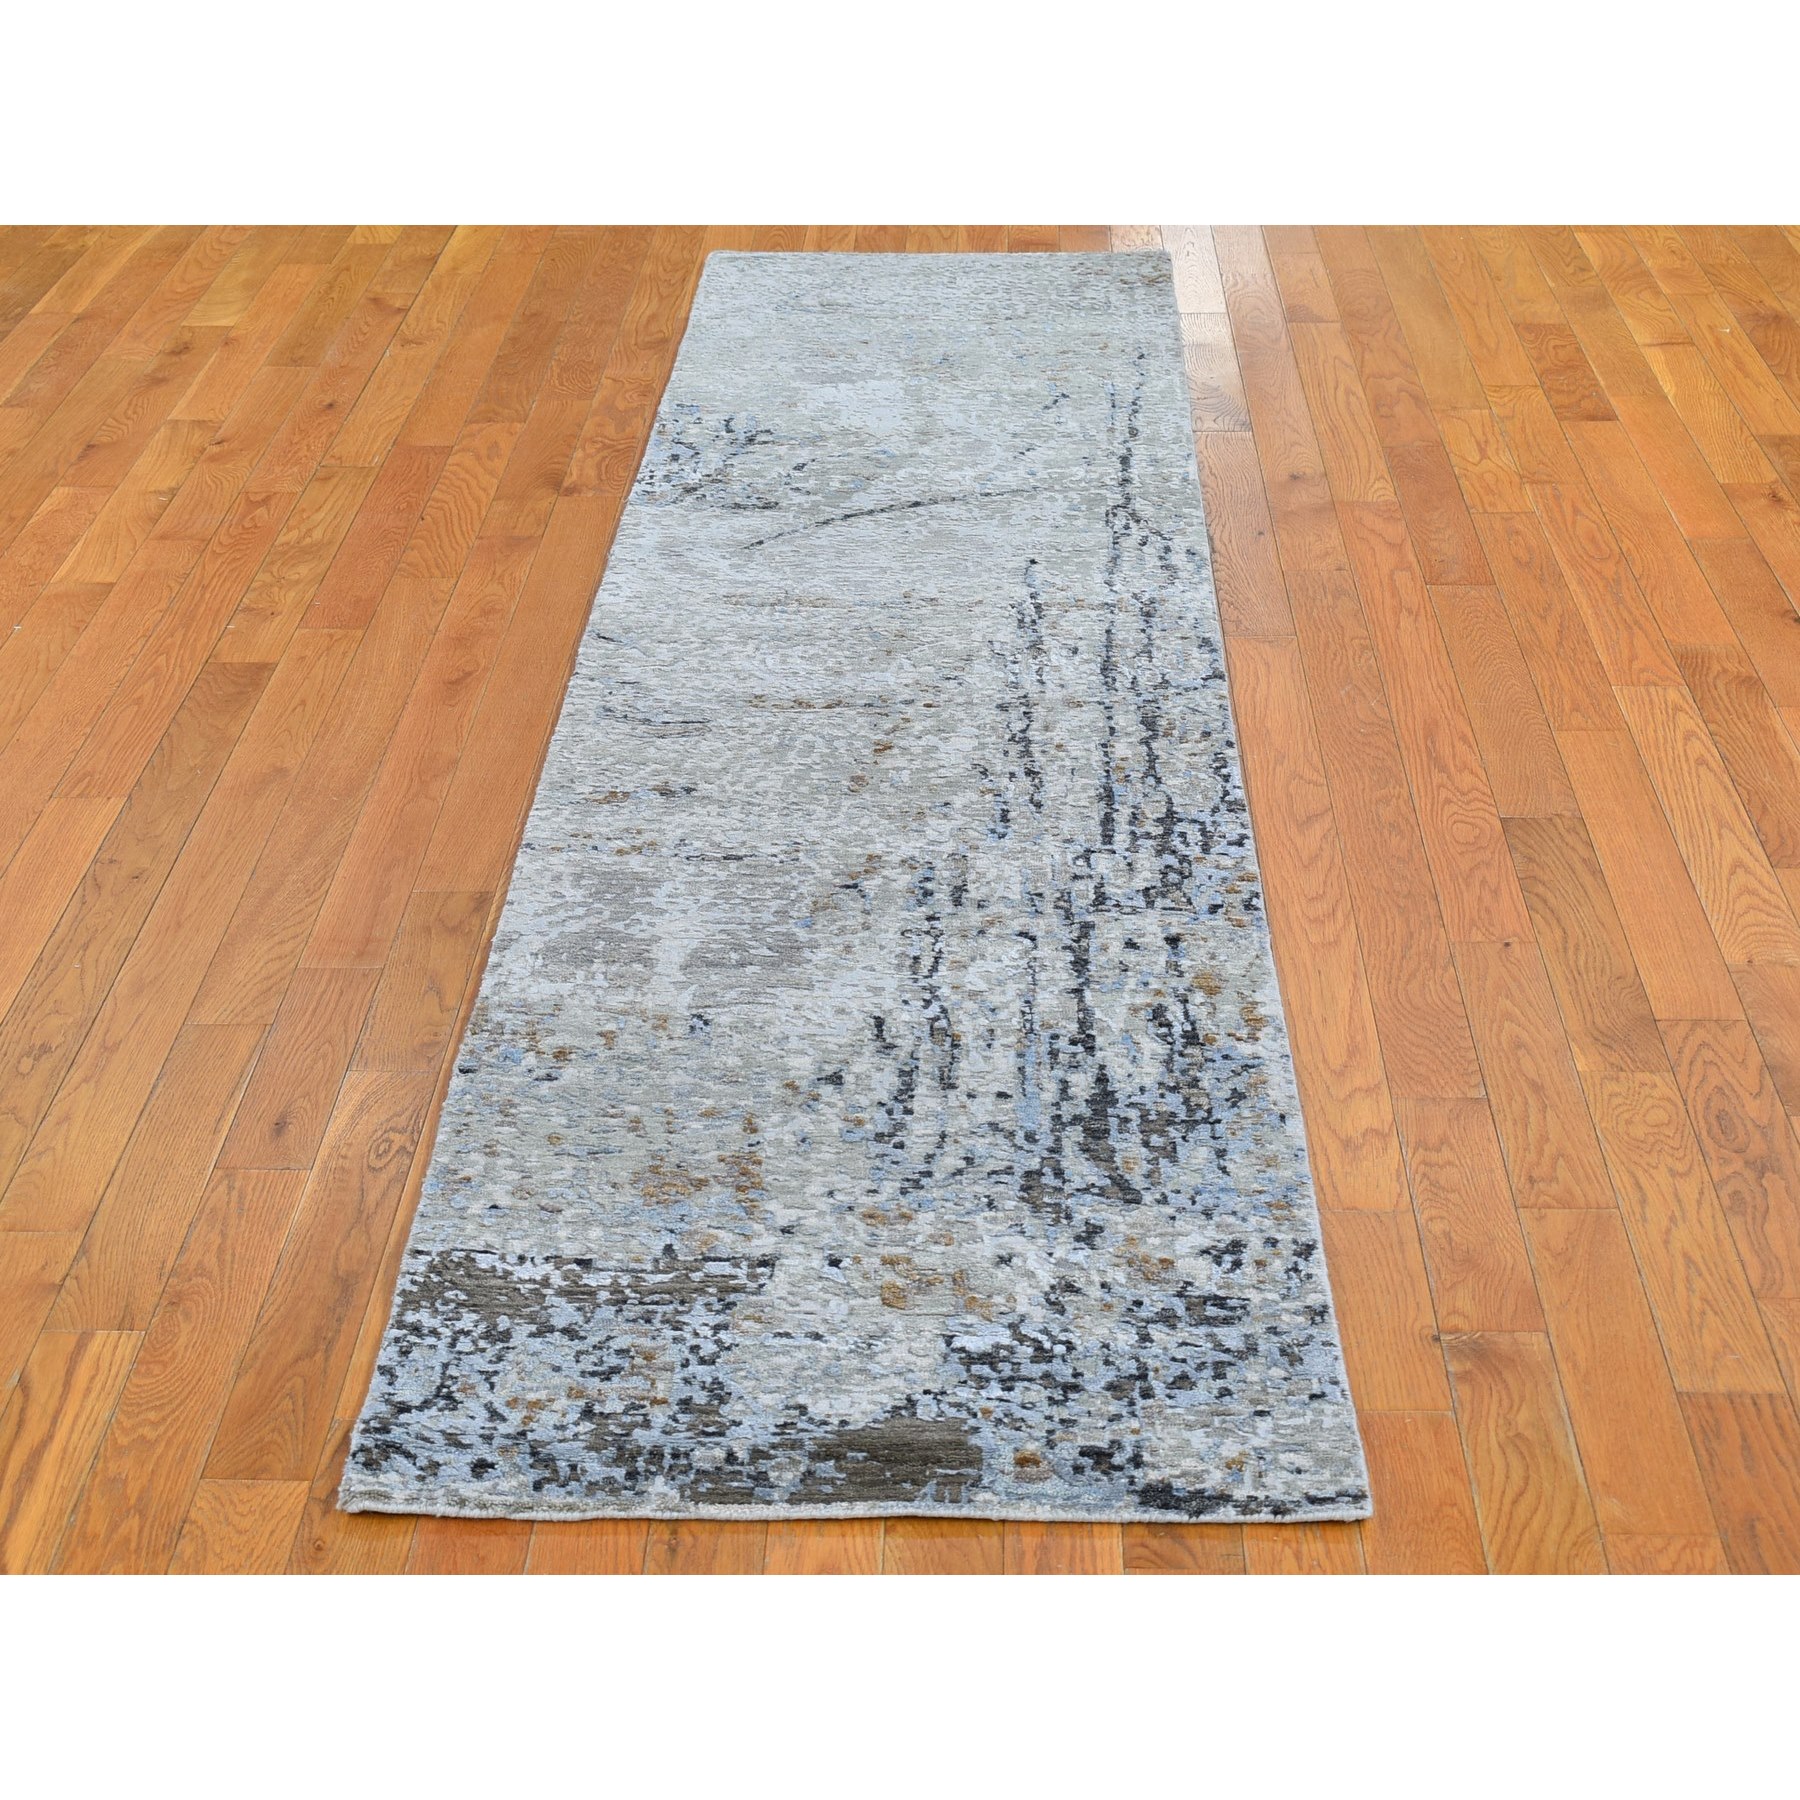 2'5"x10'2" Gray Persian Knot with Abstract Design Wool and Silk Denser Weave Hand Woven Runner Oriental Rug 